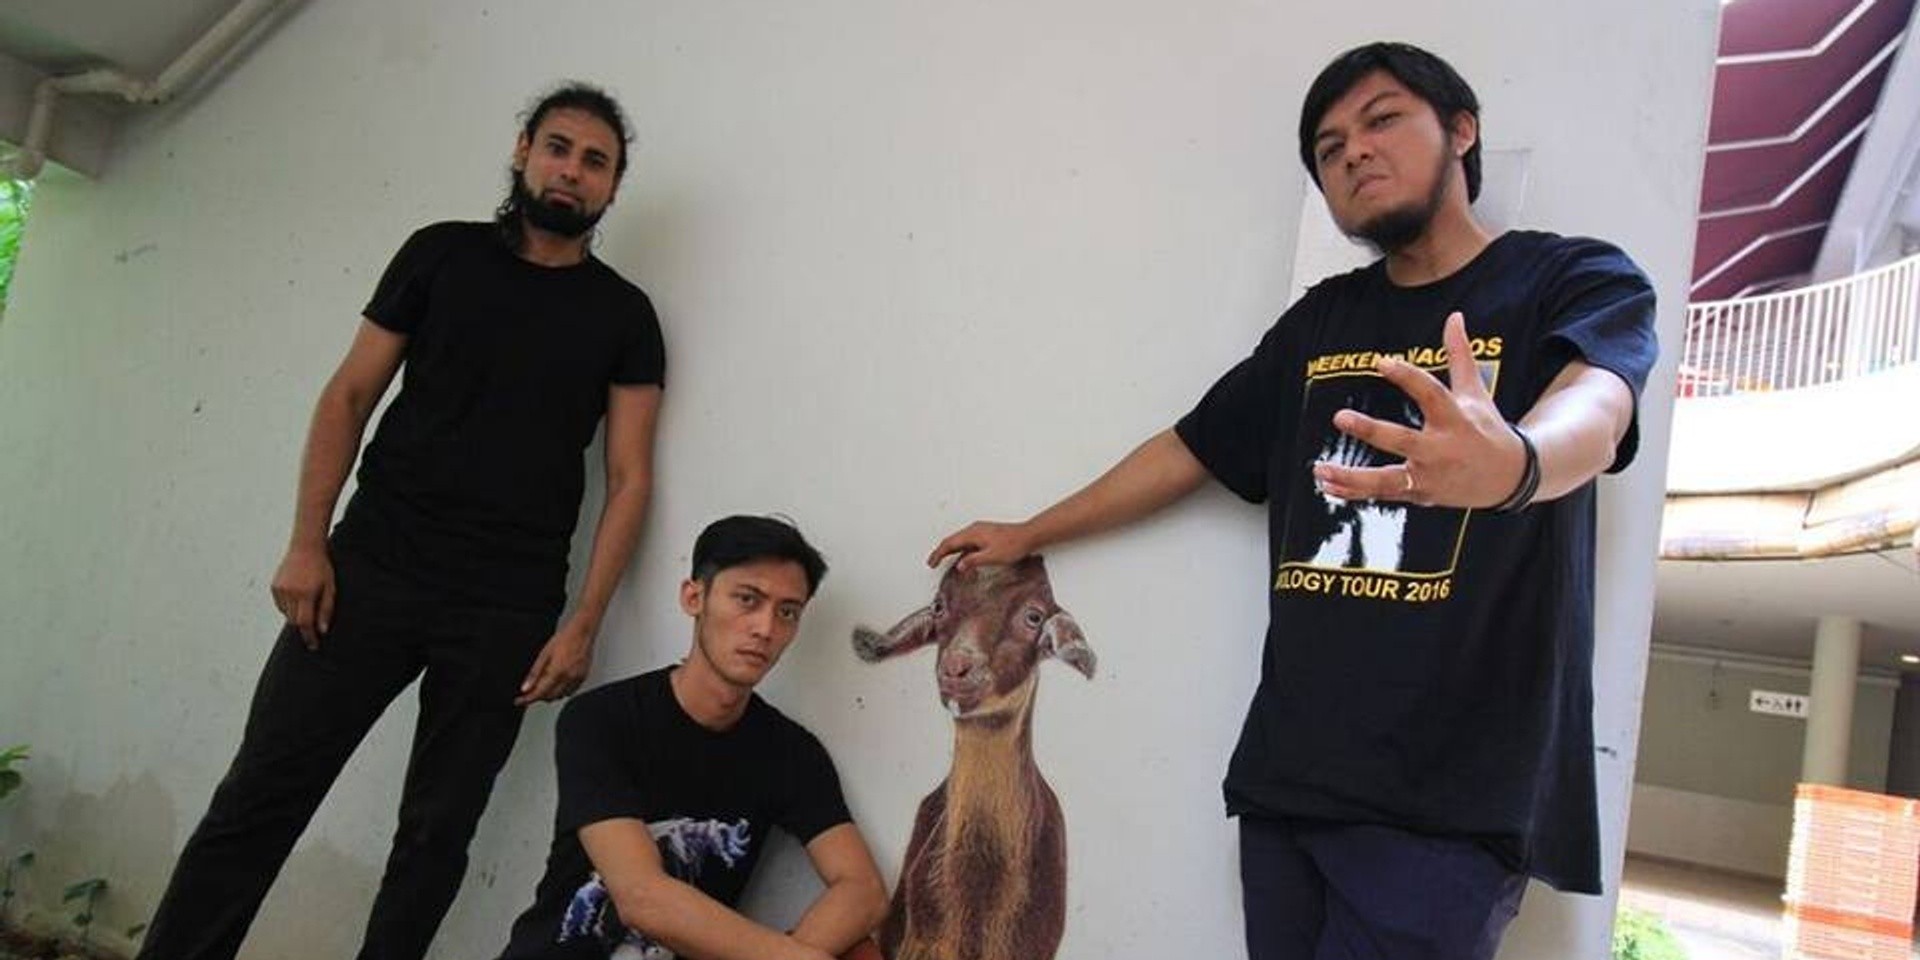 WATCH: Wormrot discuss their highly anticipated new album, their future as a band, and more